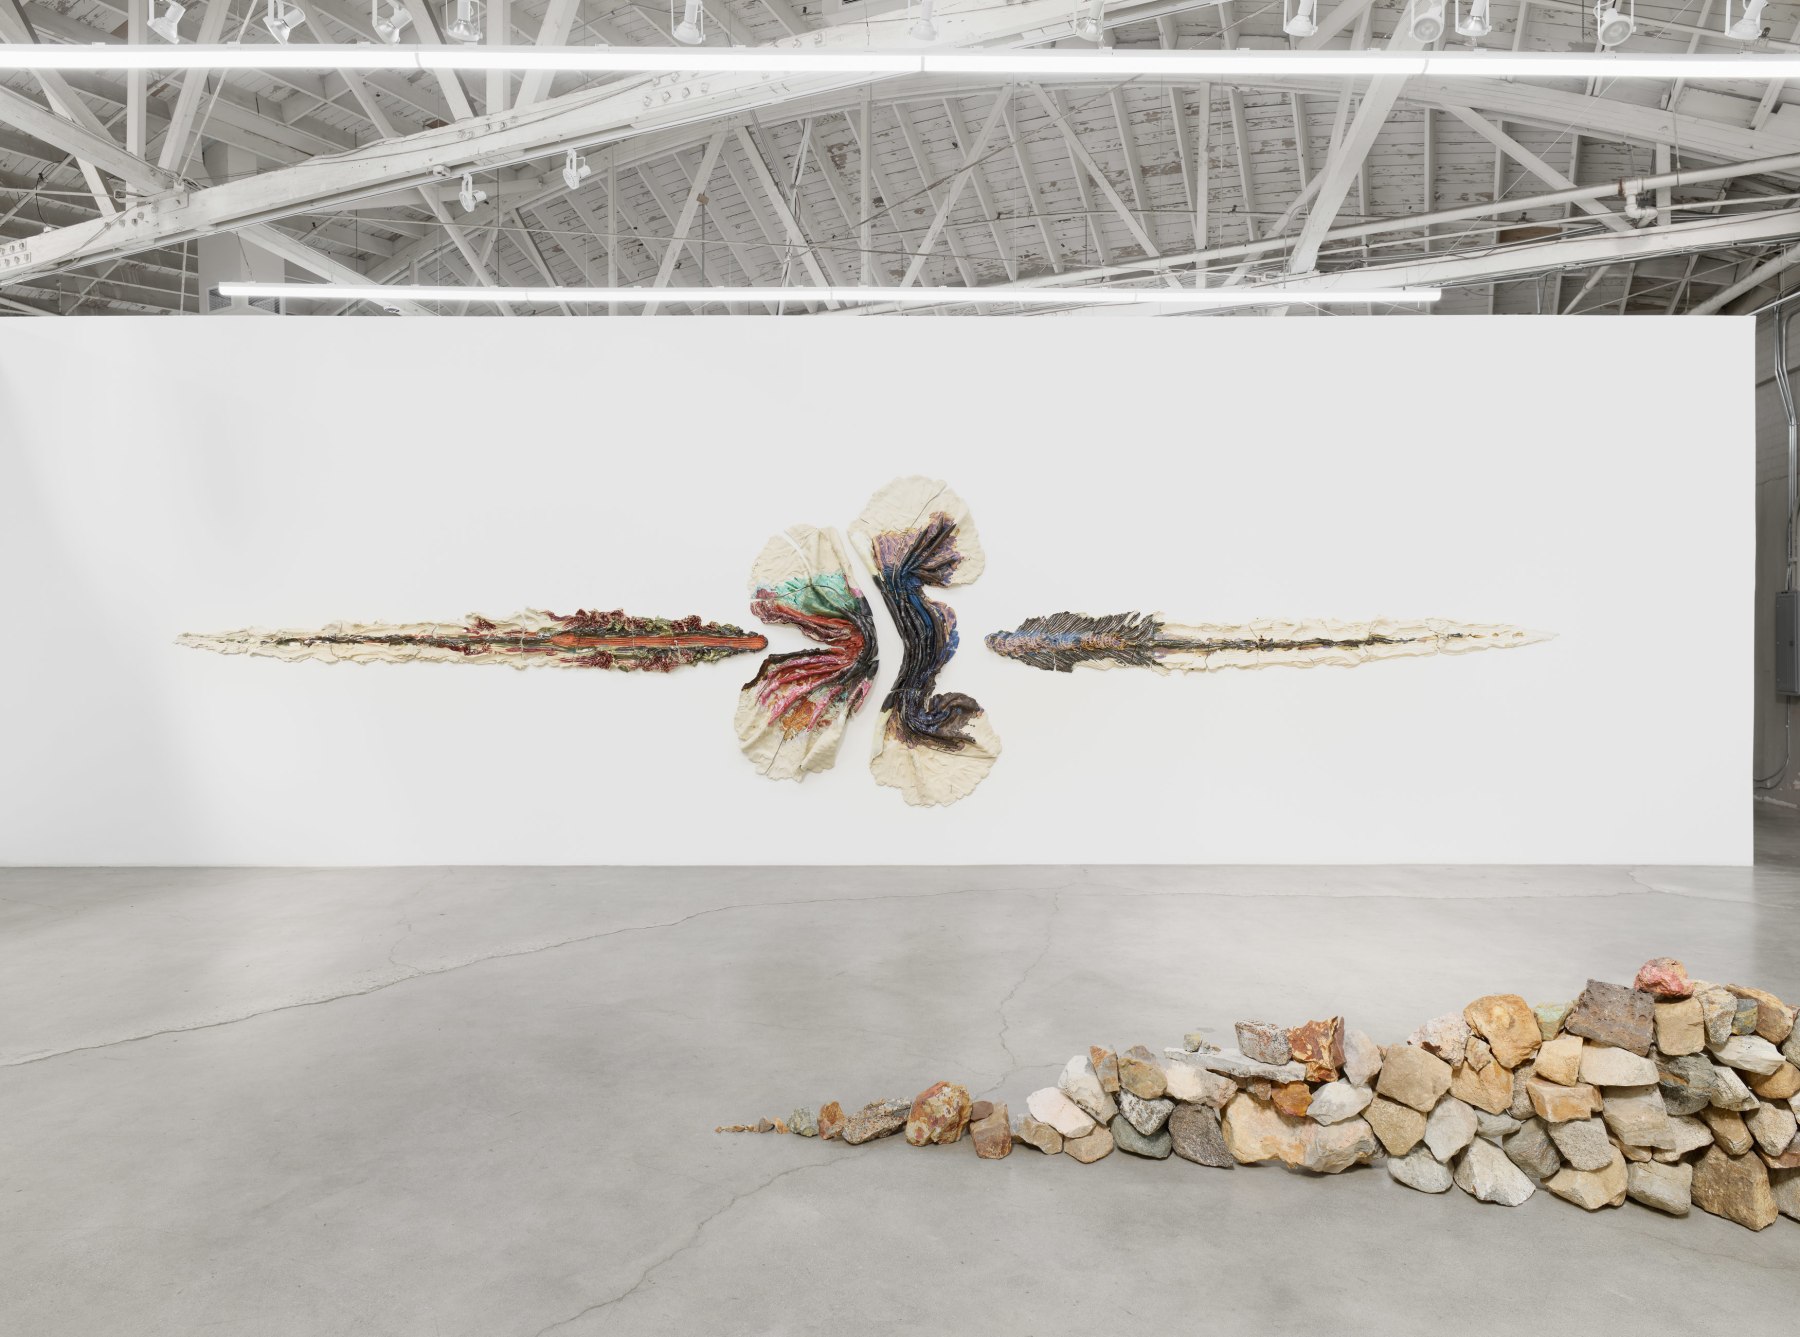 Brie Ruais, Opposing Tides, Shaping Forces, 2020, installation view in Spiraling Open and Closed Like an Aperture, 2020